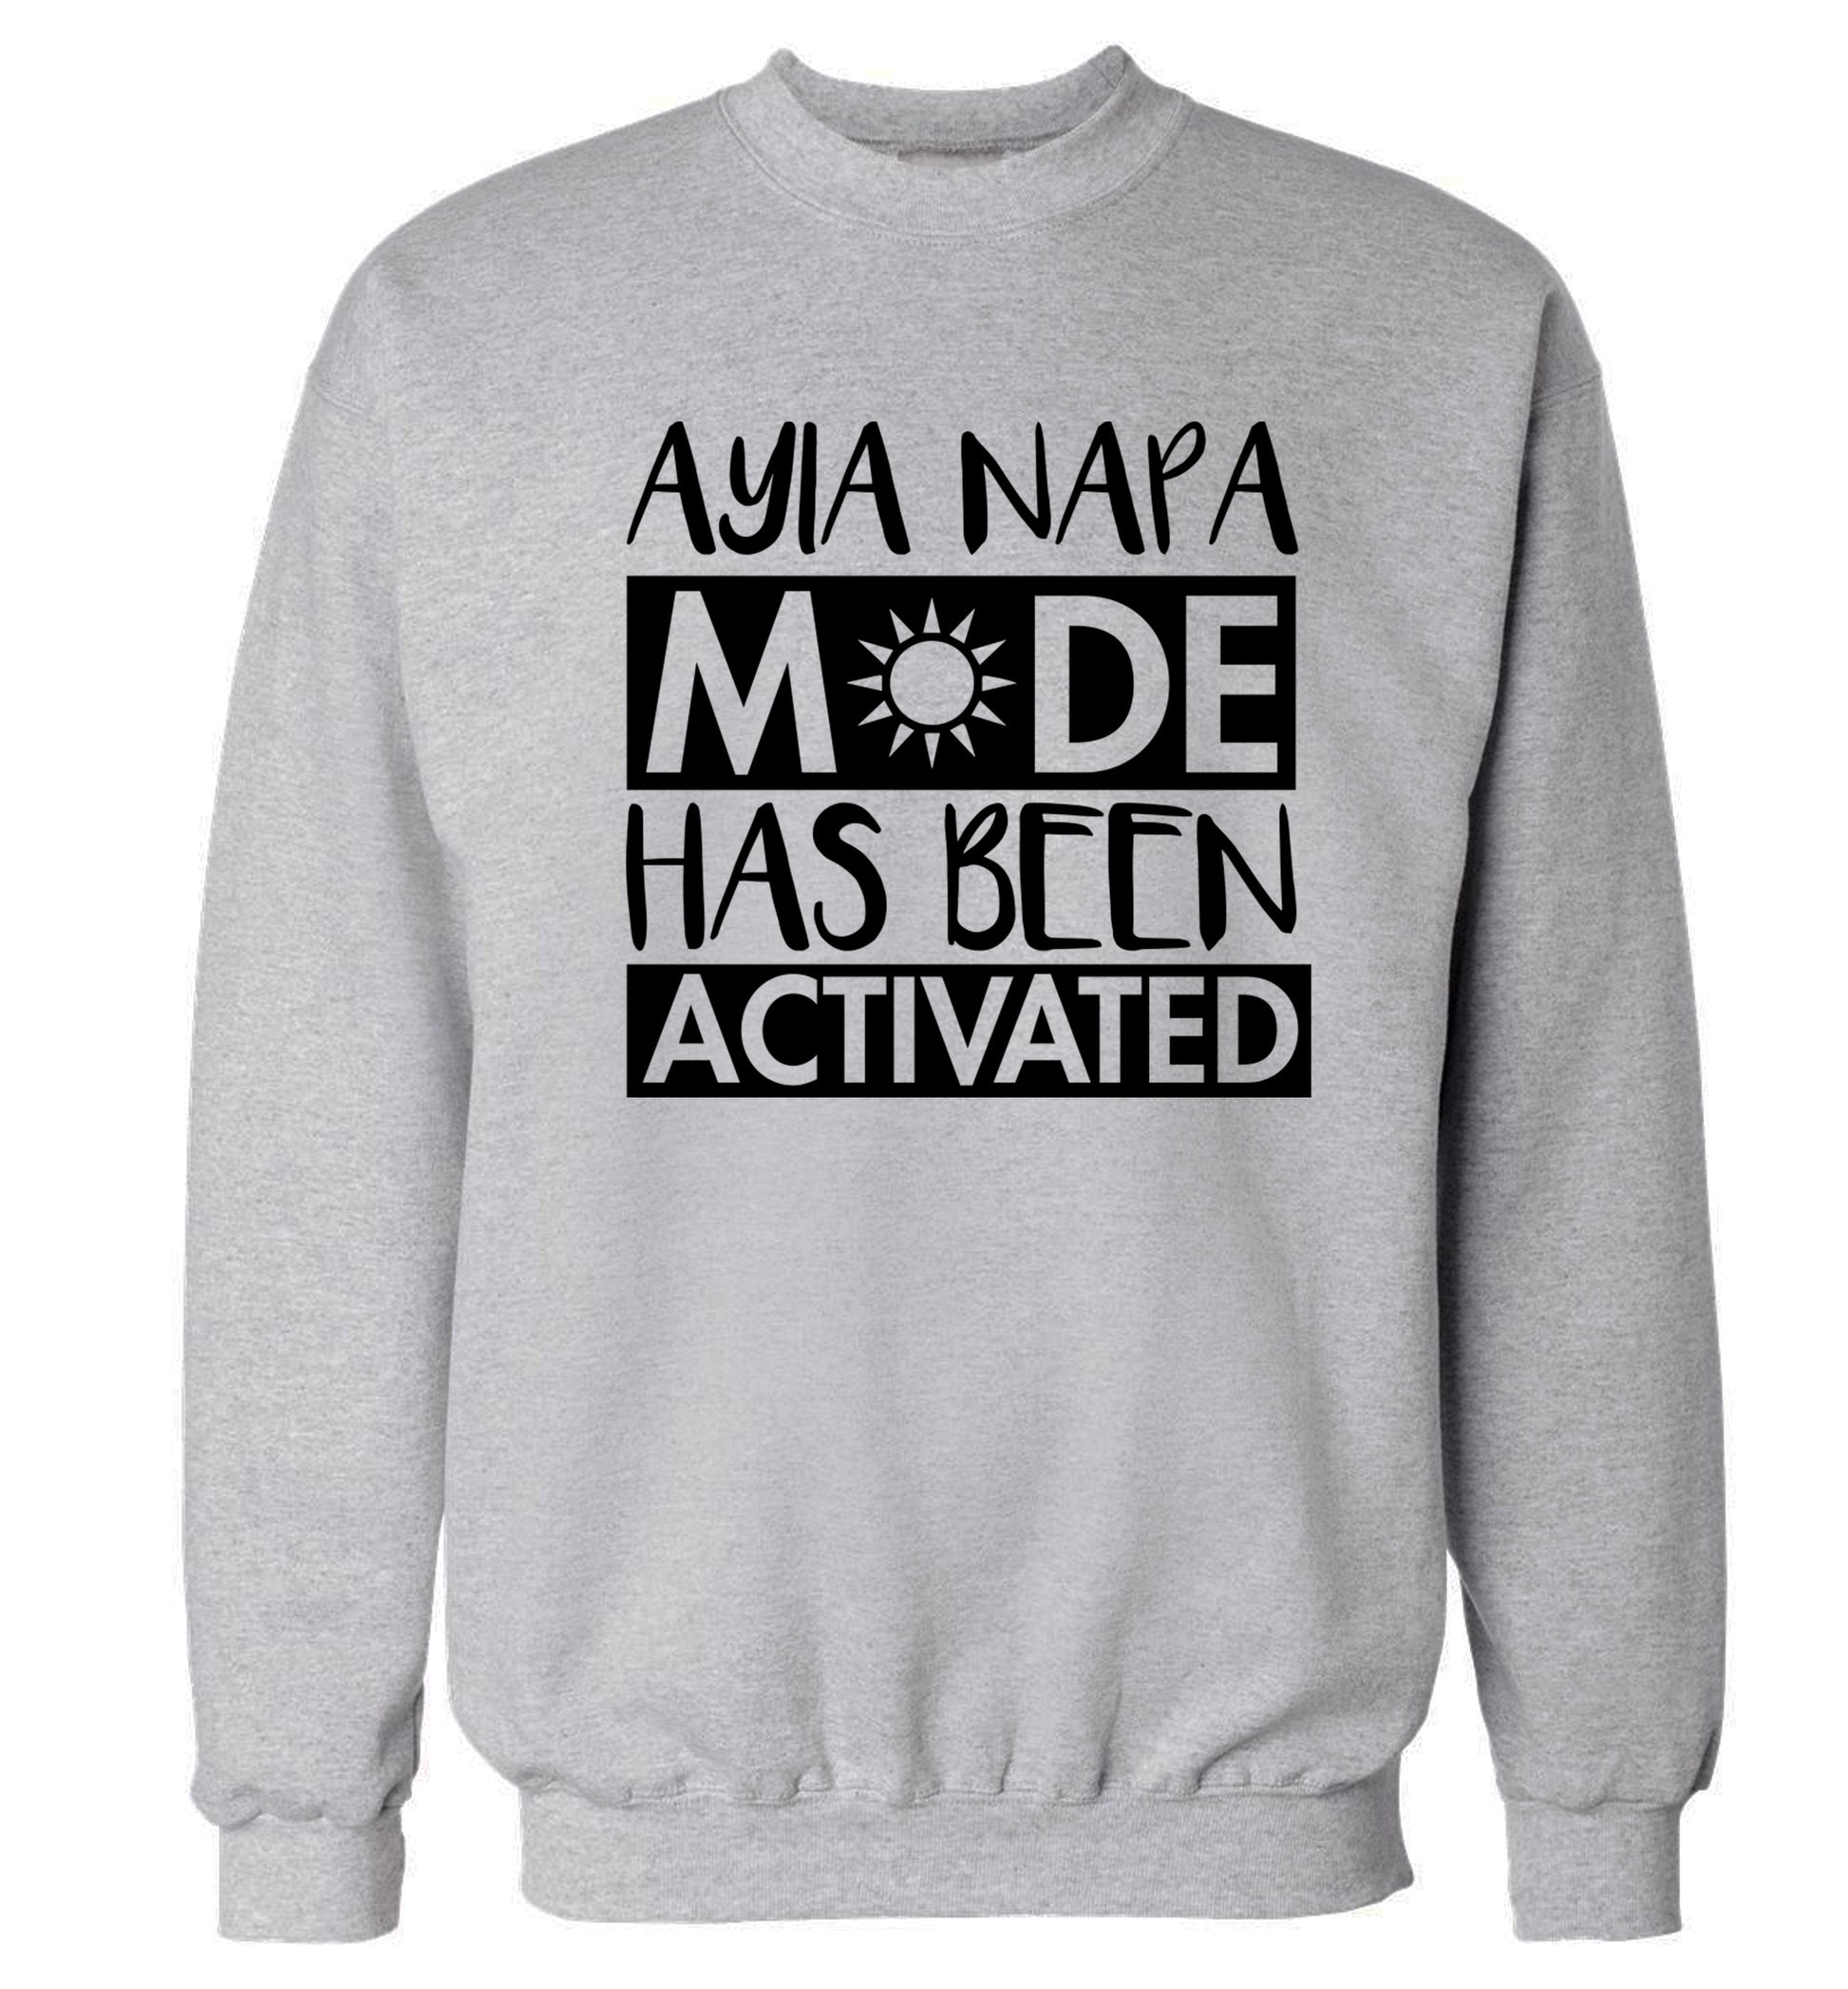 Aiya Napa mode has been activated Adult's unisex grey Sweater 2XL